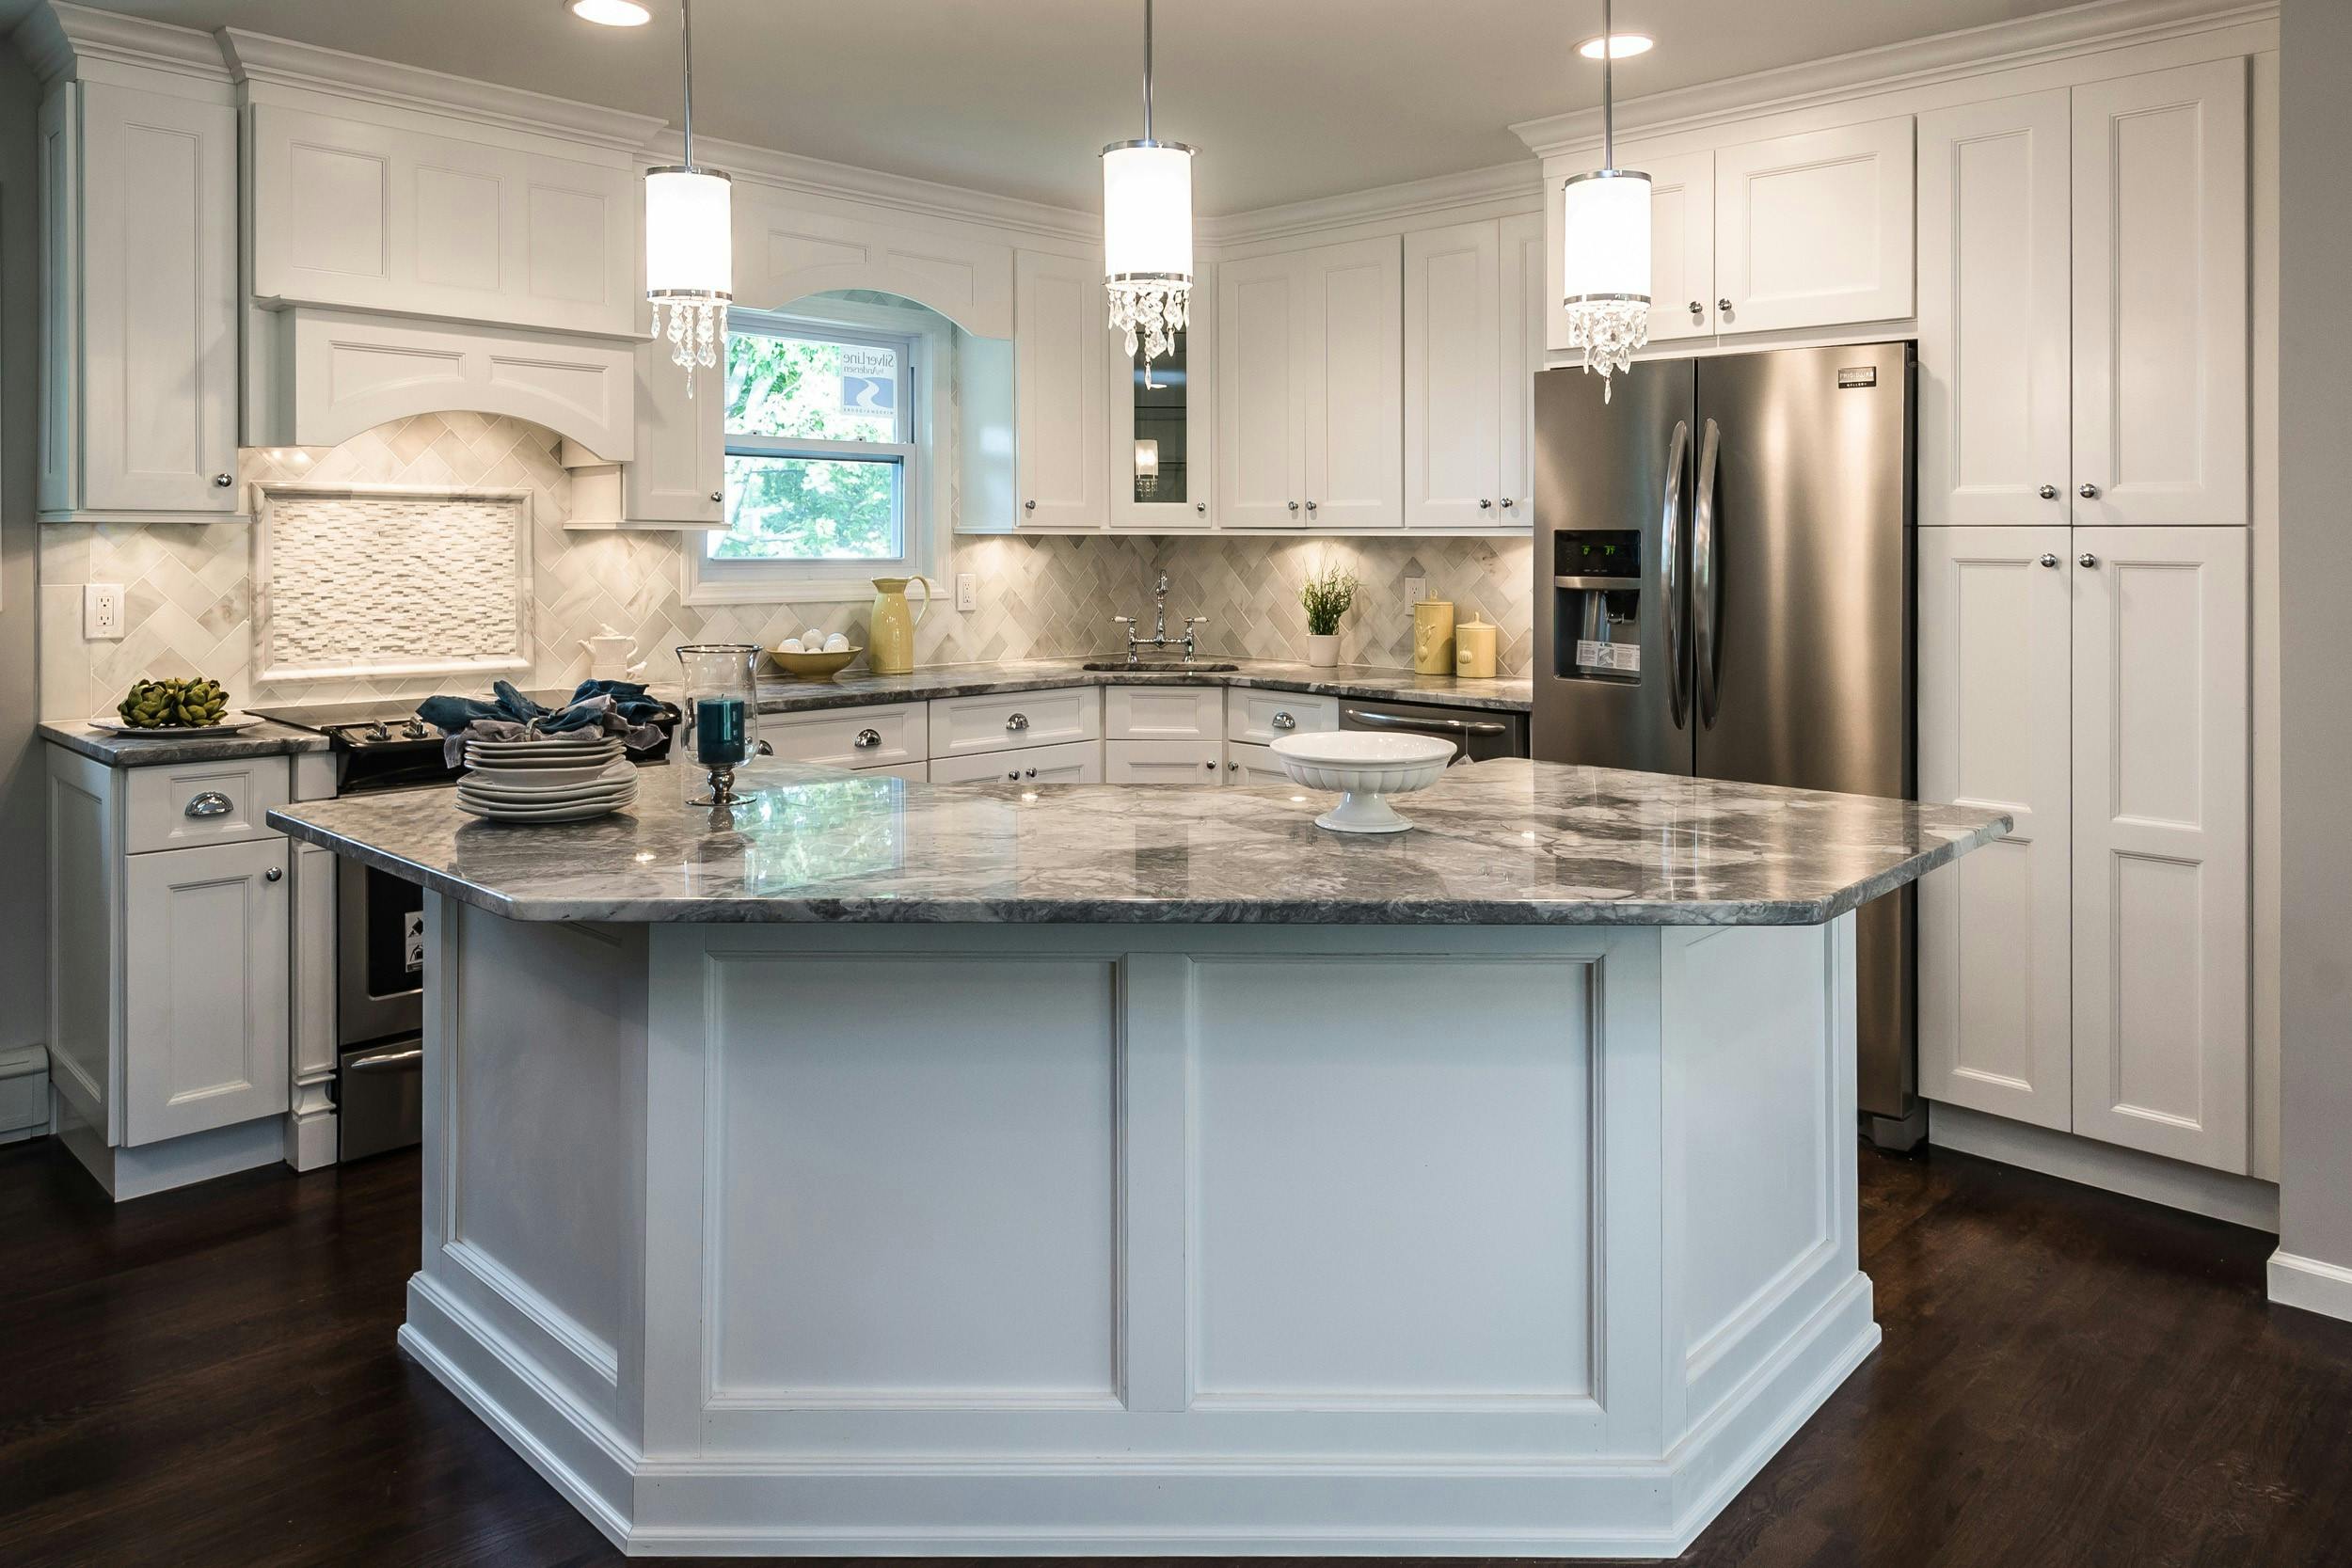 Pair Kitchen Countertops And Cabinets, What Color Countertops With Gray Cabinets